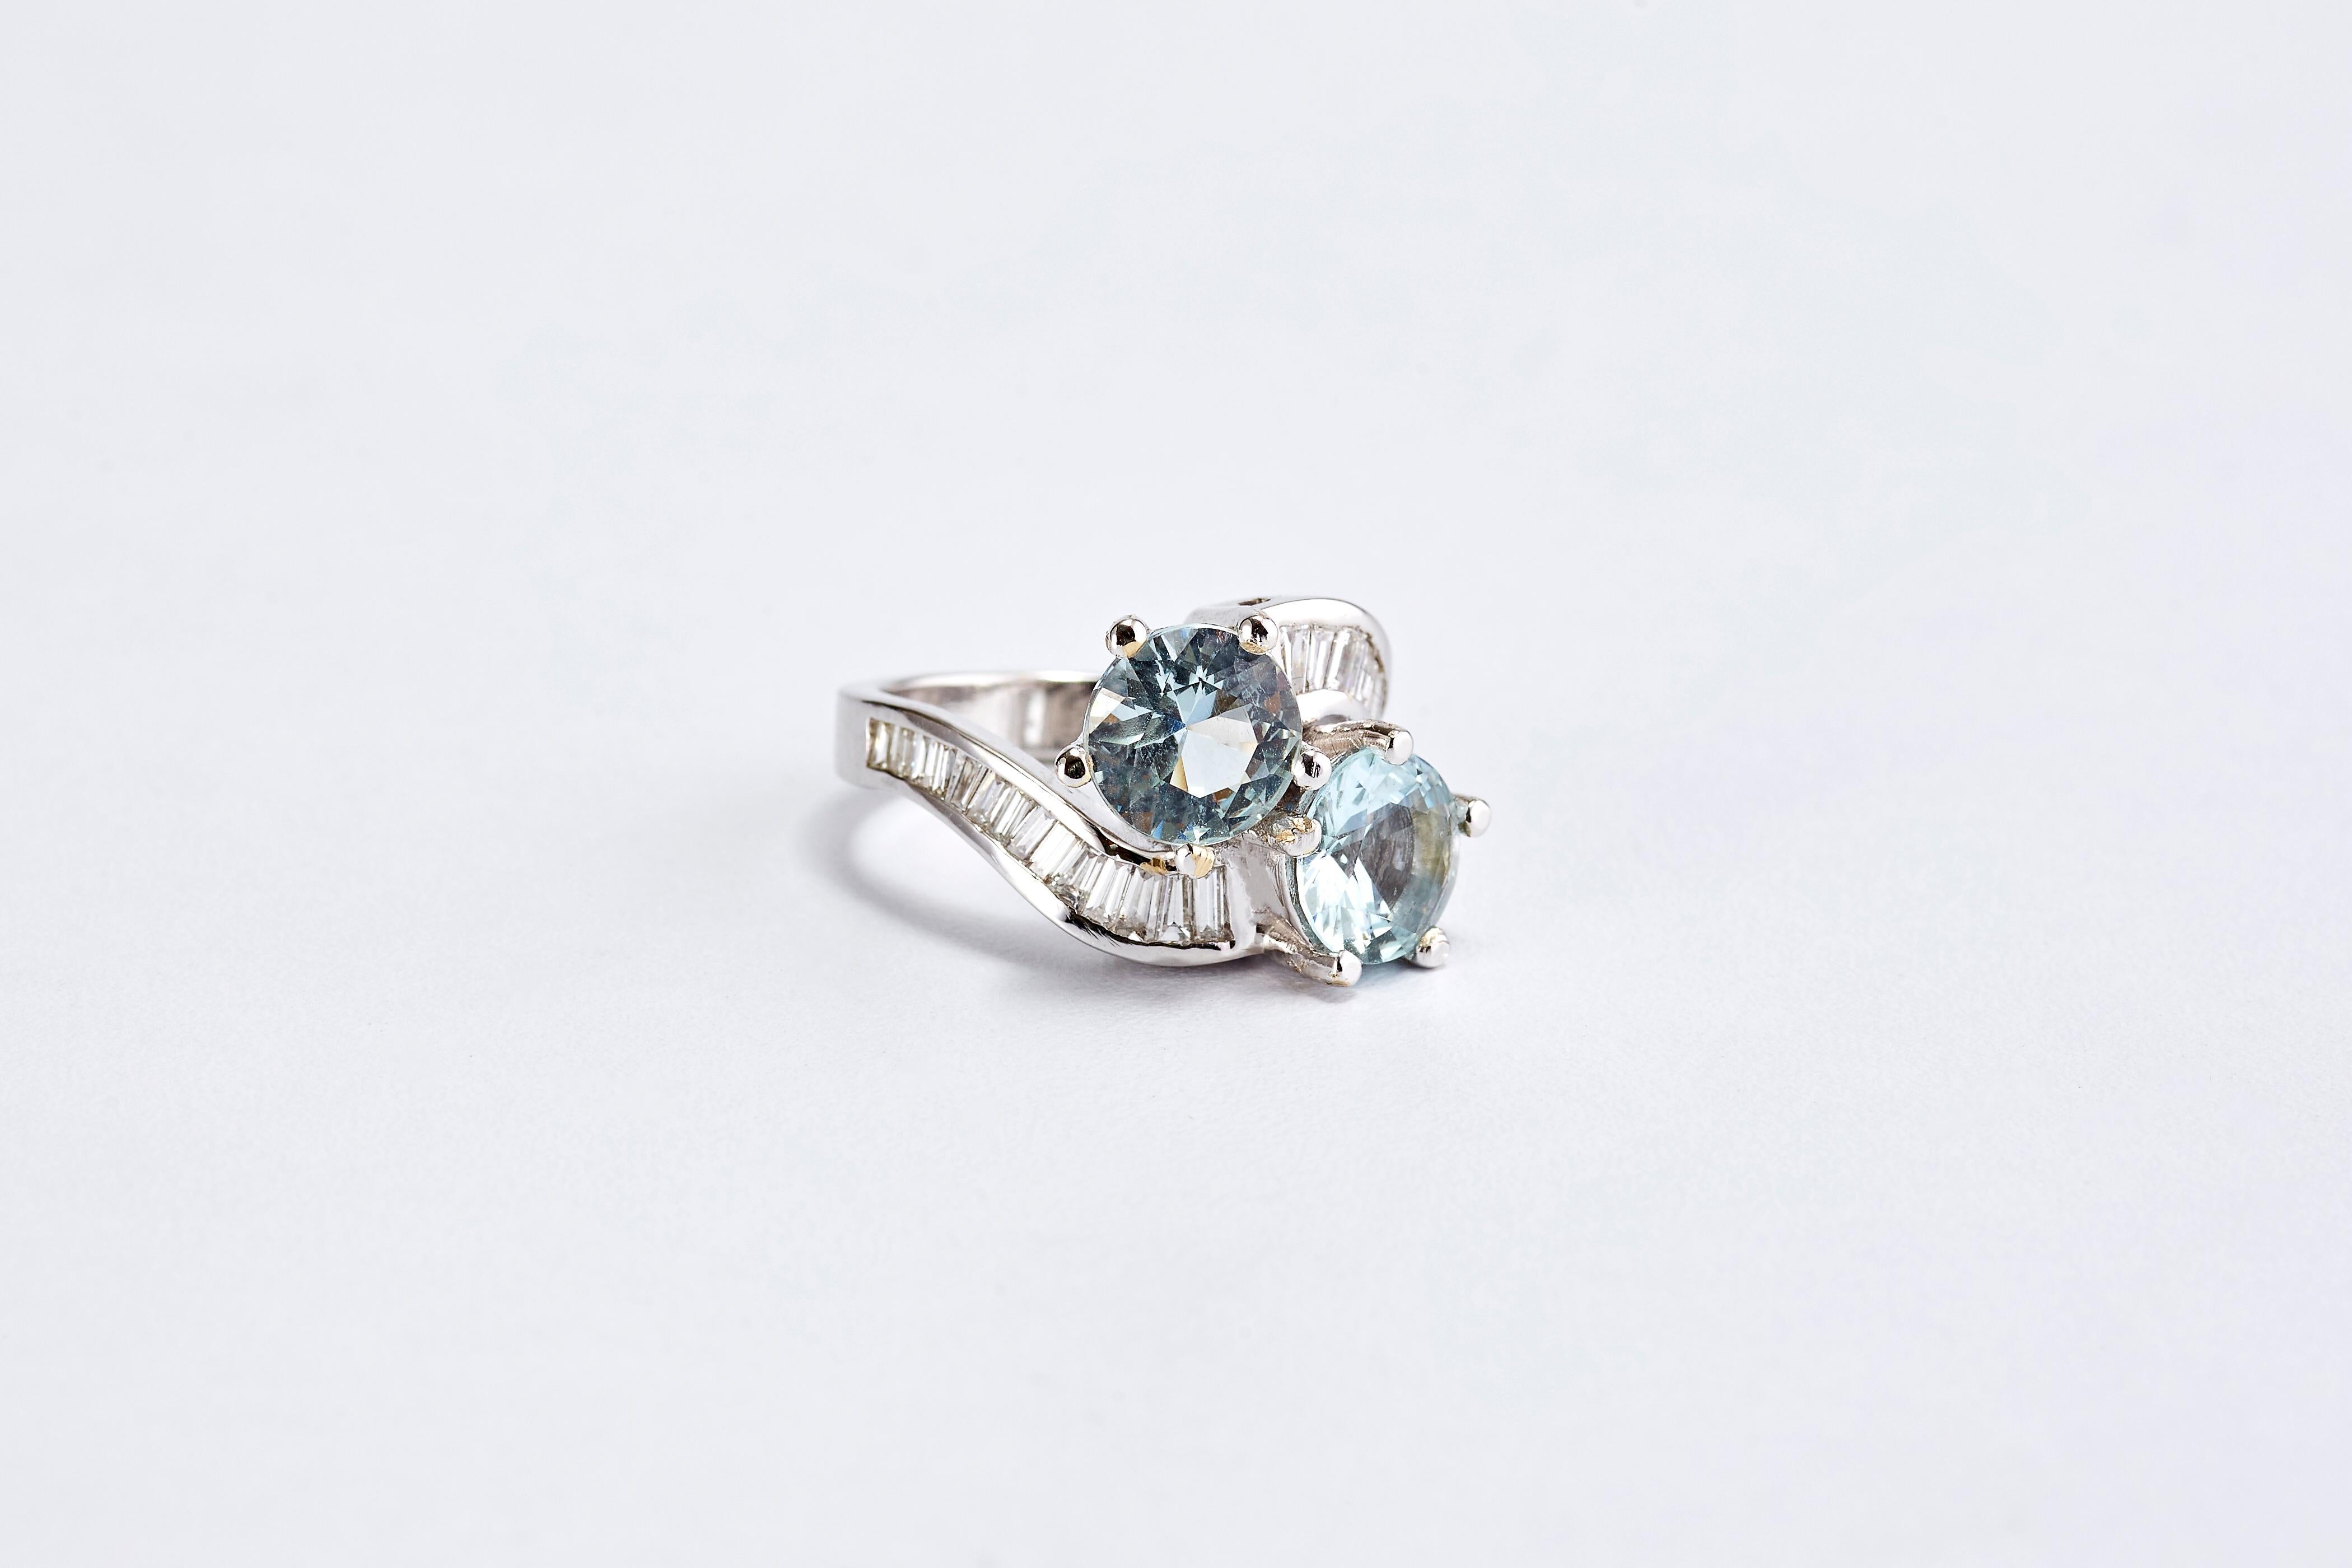 14 Karat White Gold Ring with 2 Aquamarine and Diamonds 
Two round aquamarine center stones, followed by 2 rows of baguette diamonds. Stunning and impressive ring, very in style.
Aquamarine is total 5.5 ct. Quality diamonds G VS1 total weight about